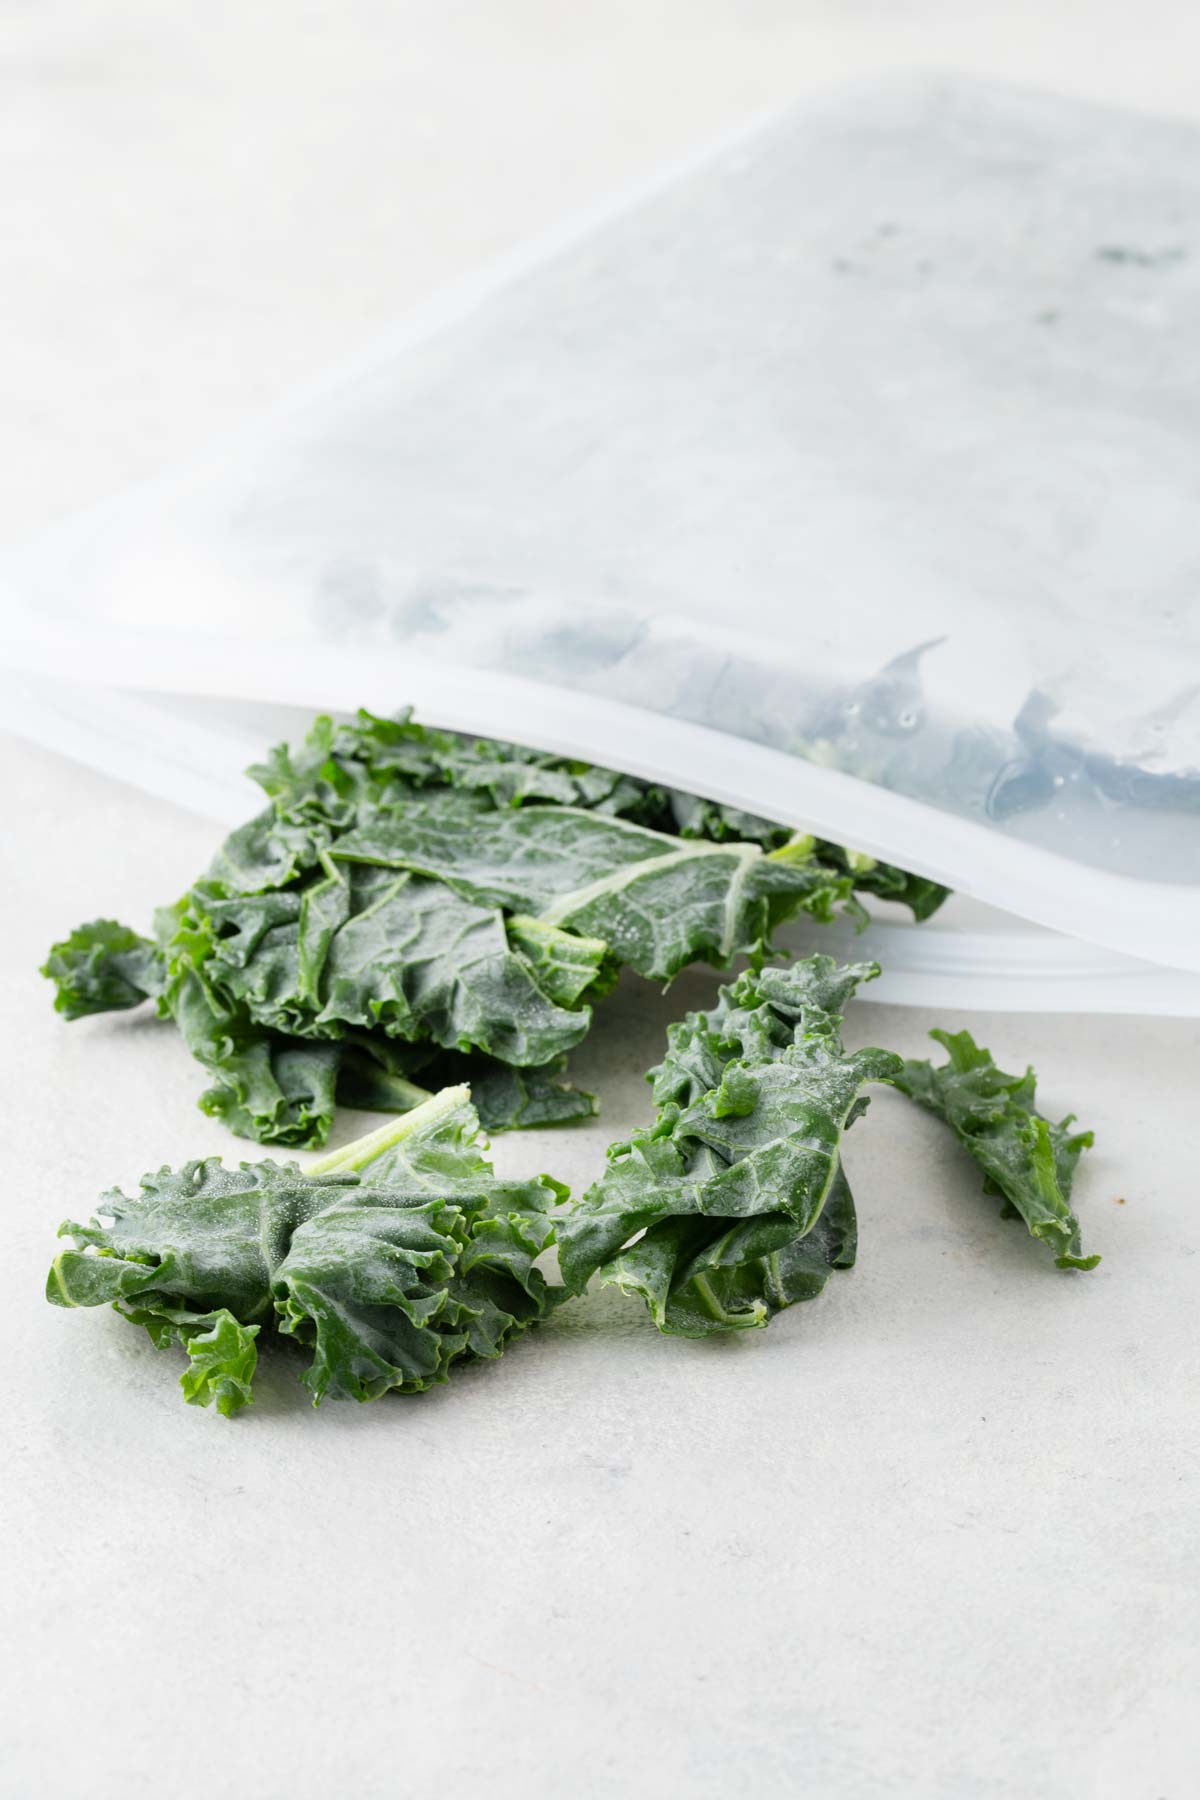 Frozen kale in a silicone freezer bag.